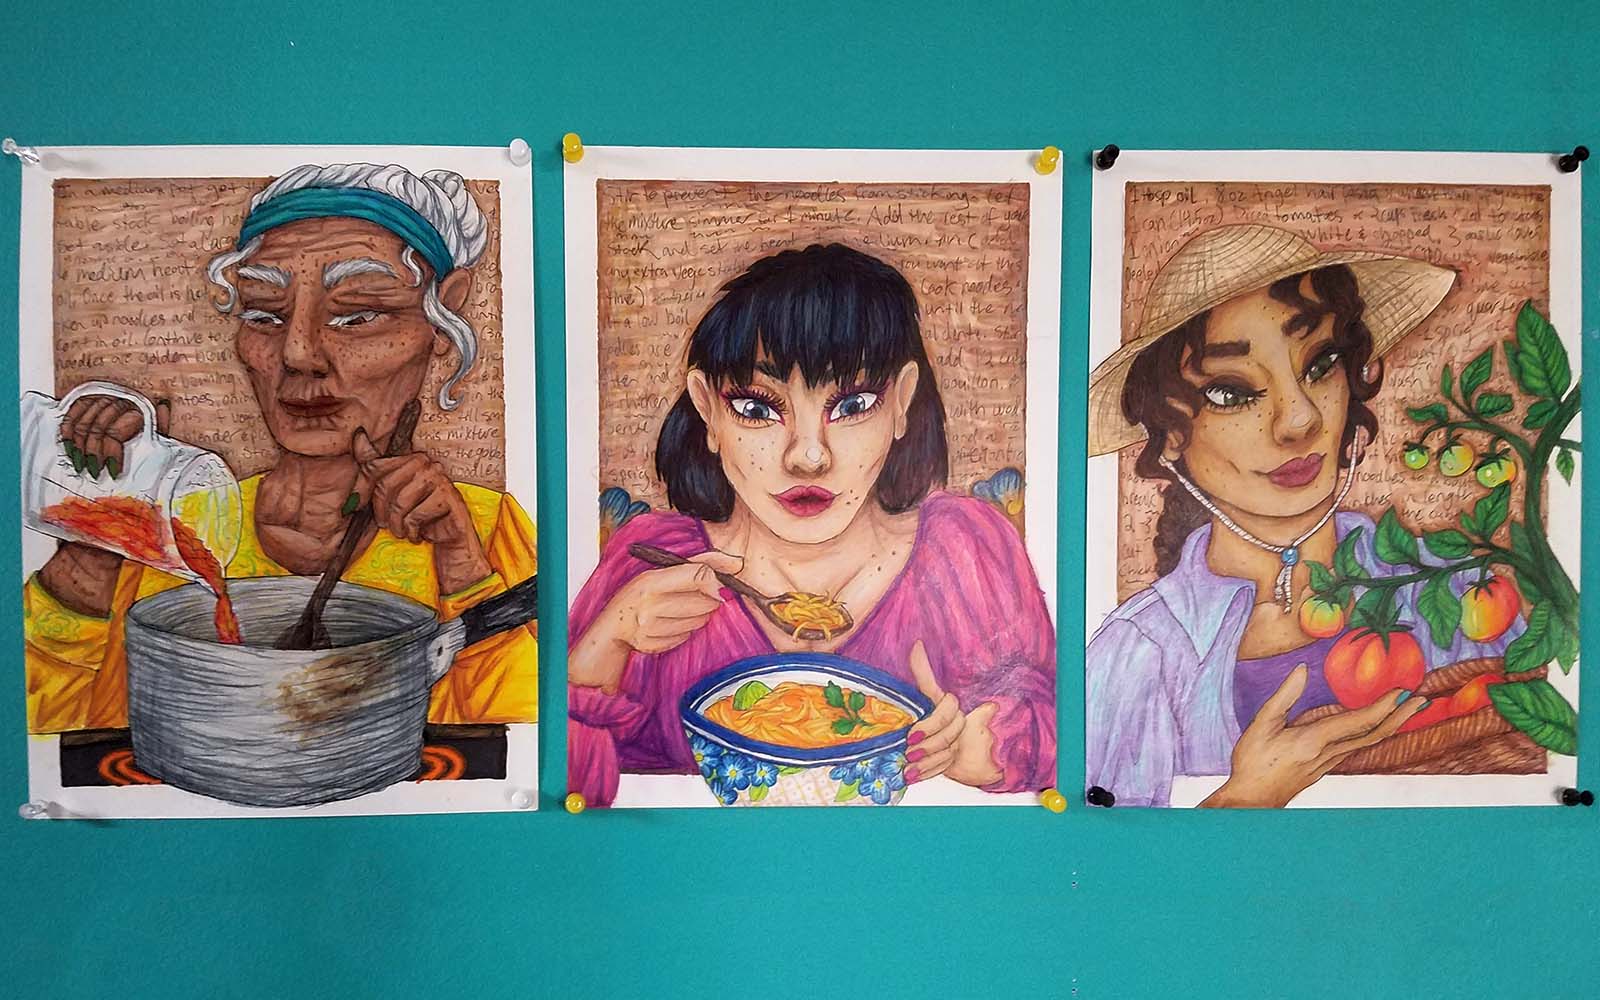 A trio of illustration of three people cooking, eating and harvesting food.